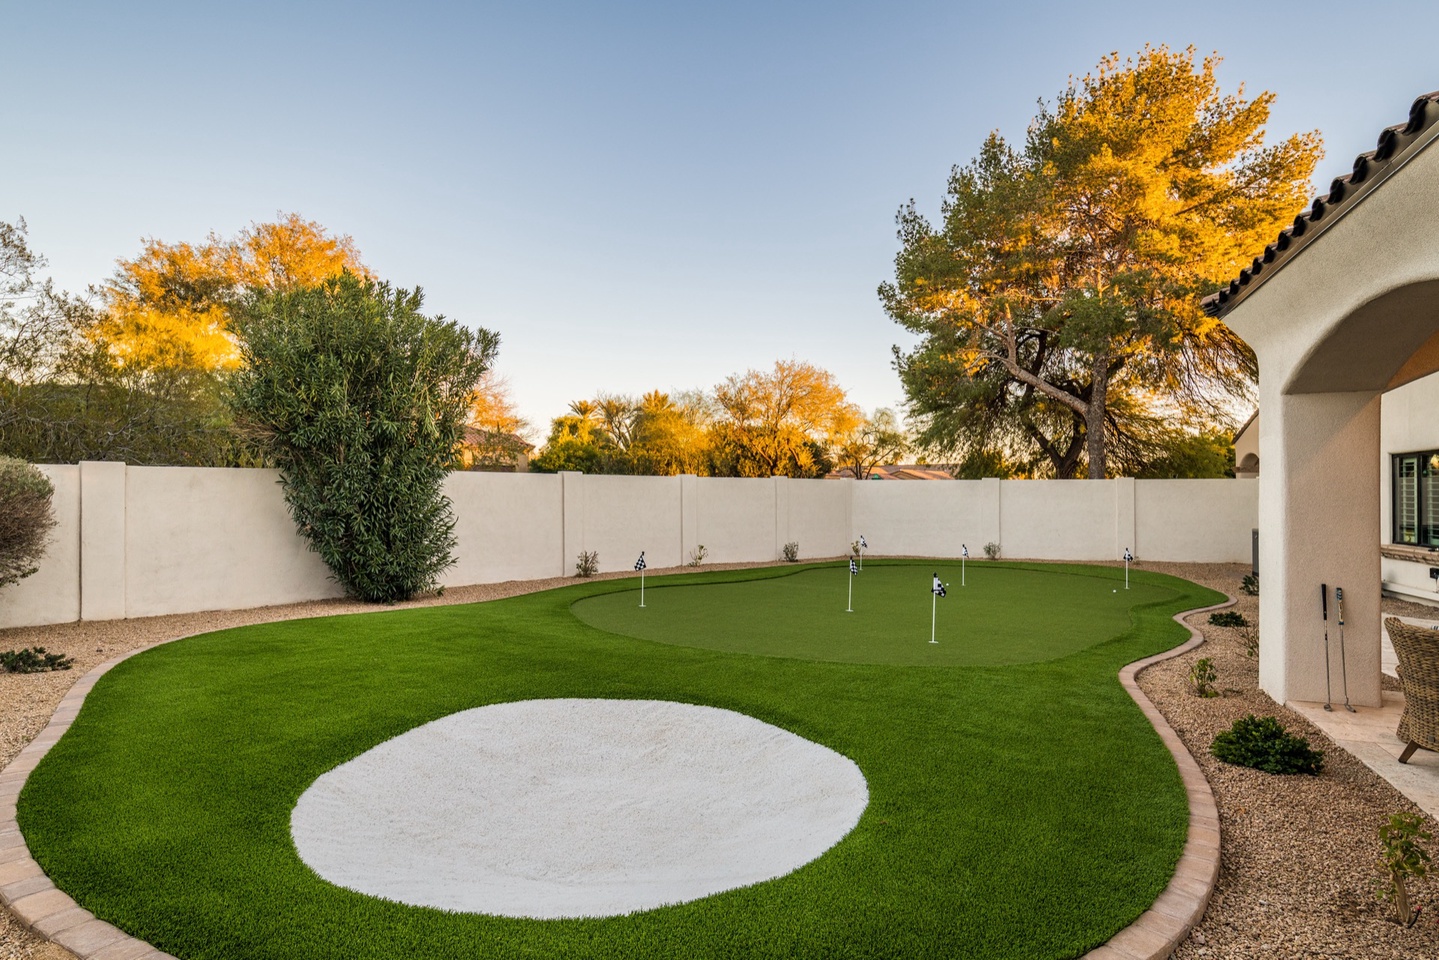 Large putting green space